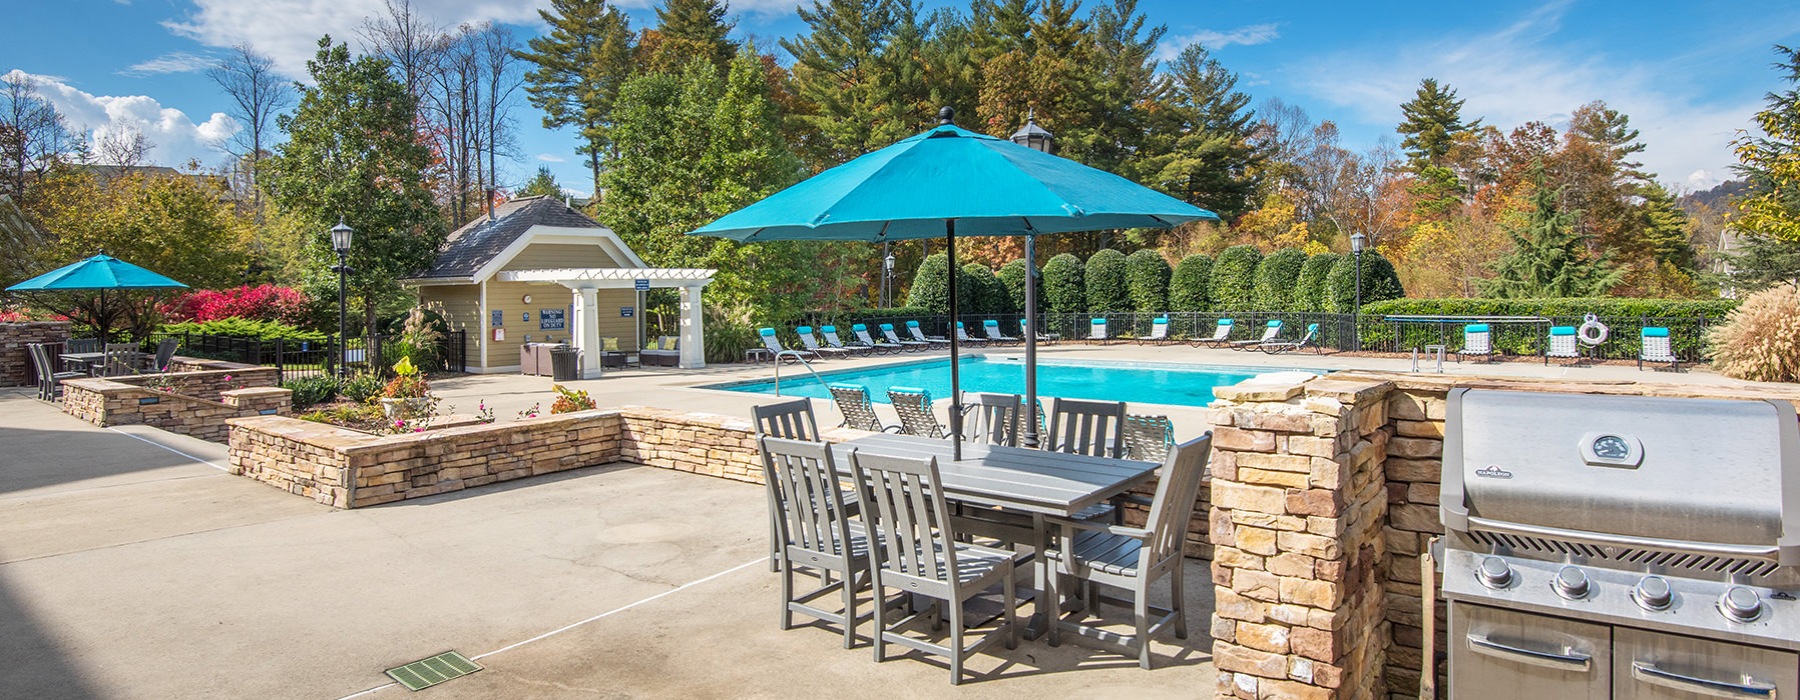 Grills, shaded tables, and pool by wooded area